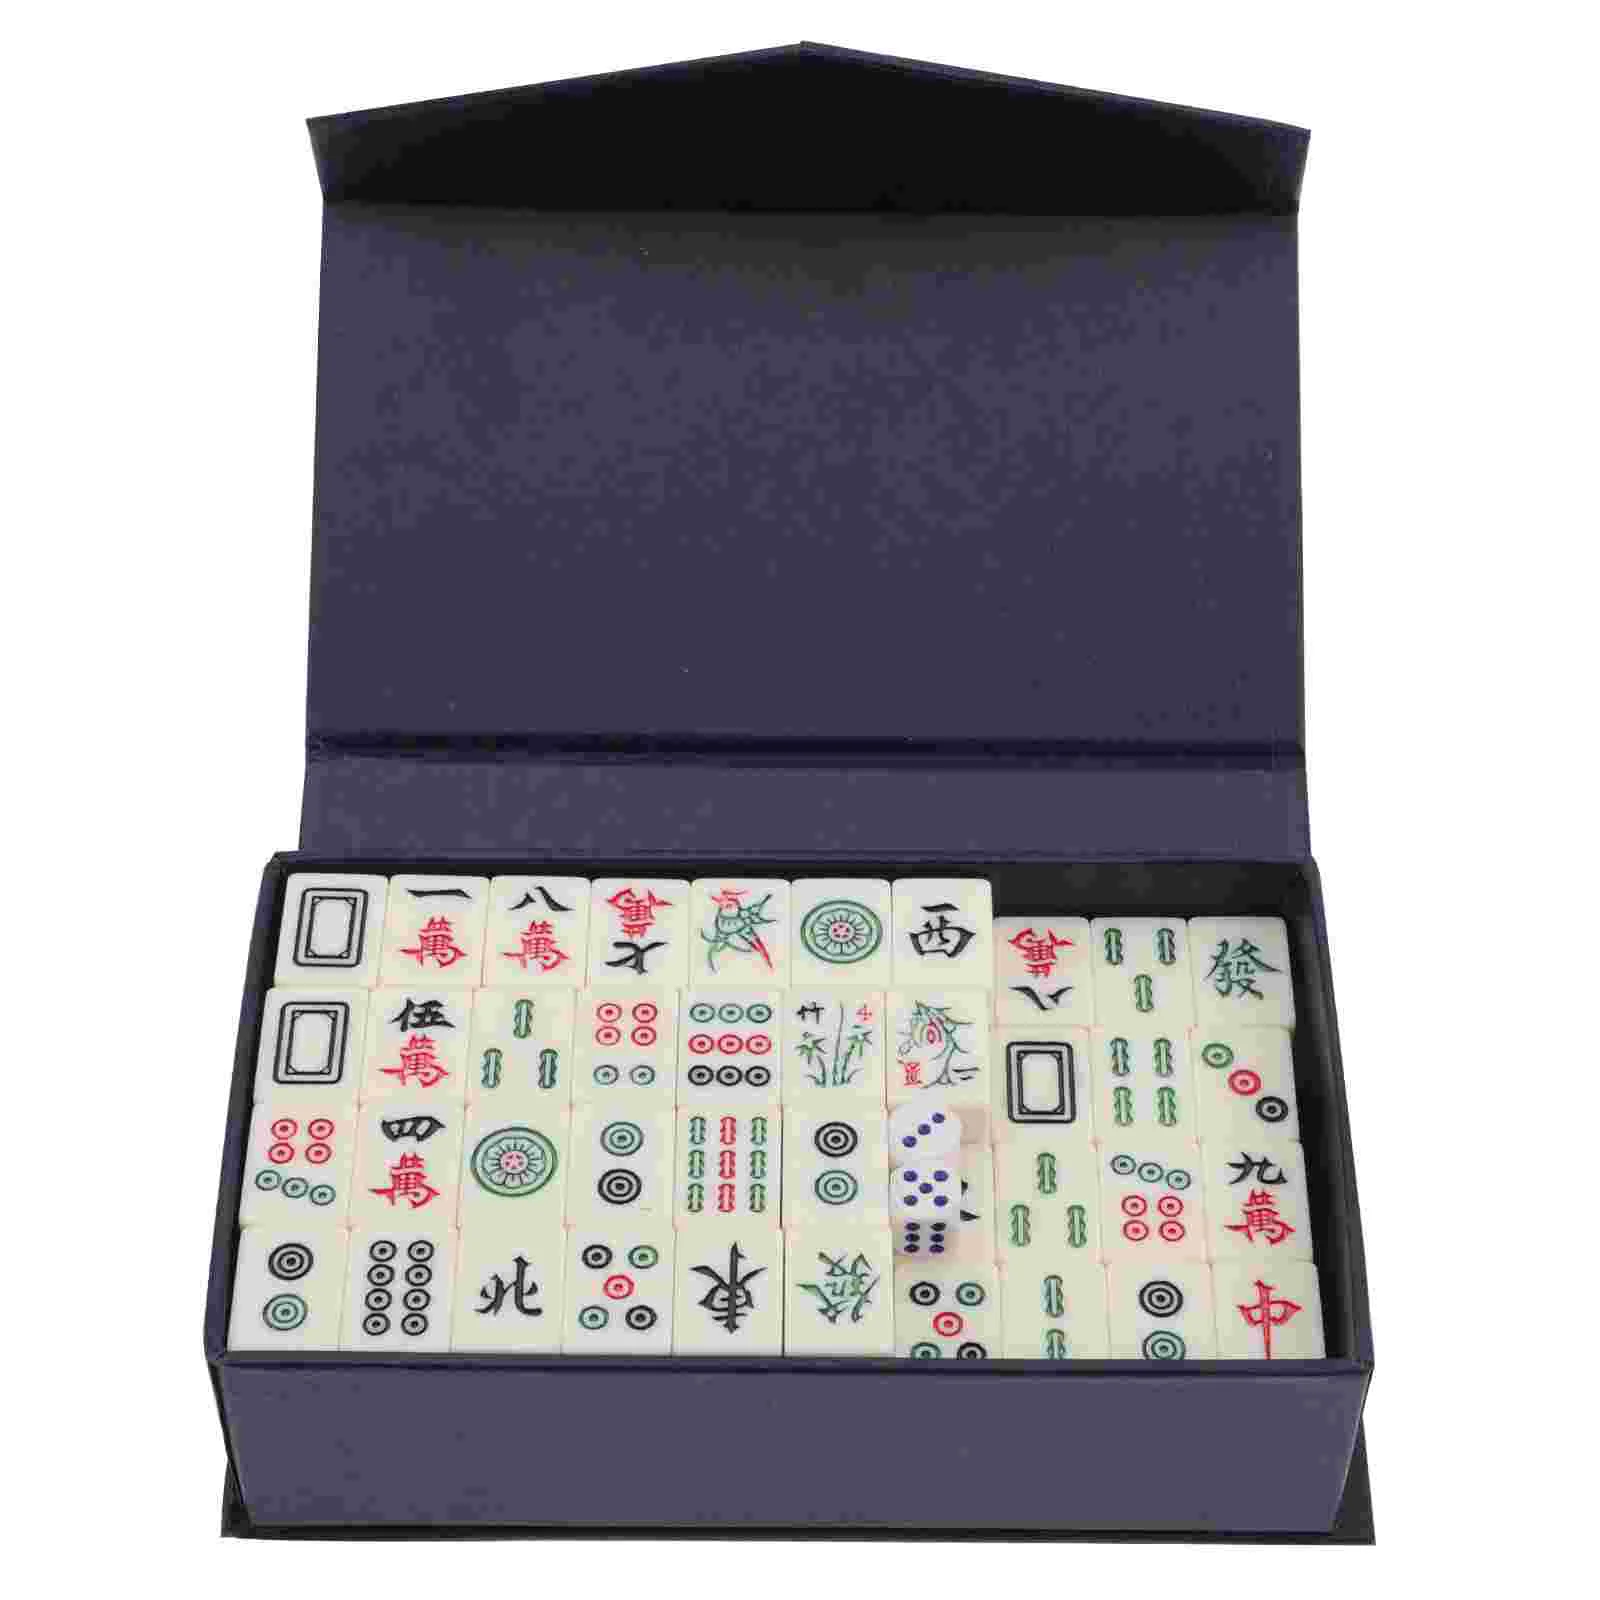 1 Set Mini Mahjong Family Board Party Mahjong with Storage Box mini board game xo chess board game family family connection booster funny developing intelligent educational toy mini board